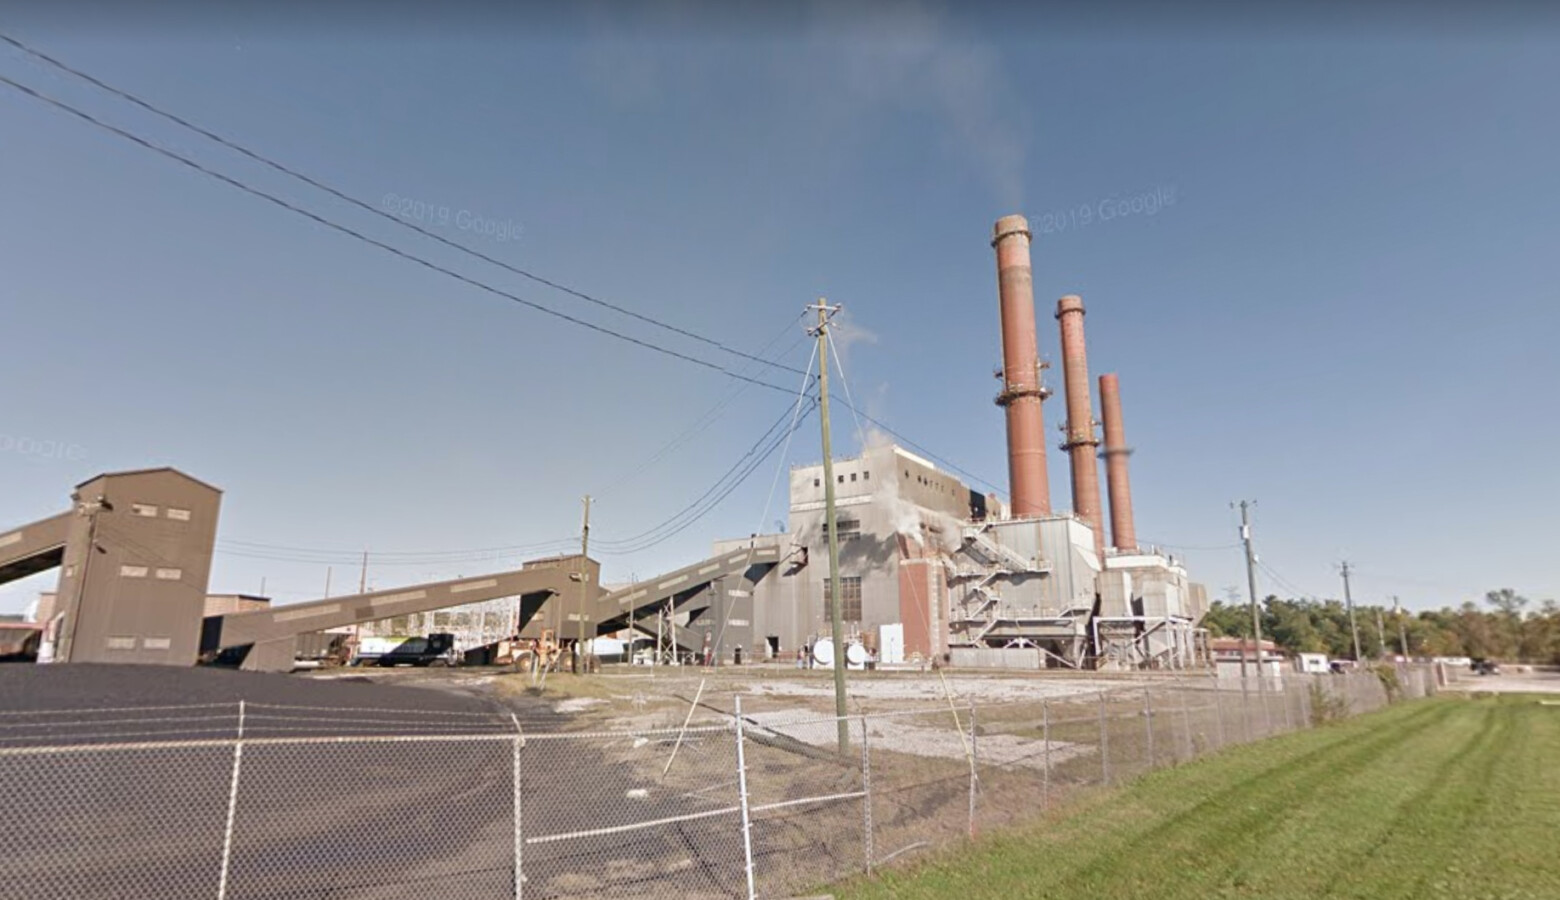 Switching from coal to natural gas at Indianapolis Power & Light's Eagle Valley Generating Station helped Morgan County to lower its sulfur dioxide emissions. (Courtesy of Google Maps.)